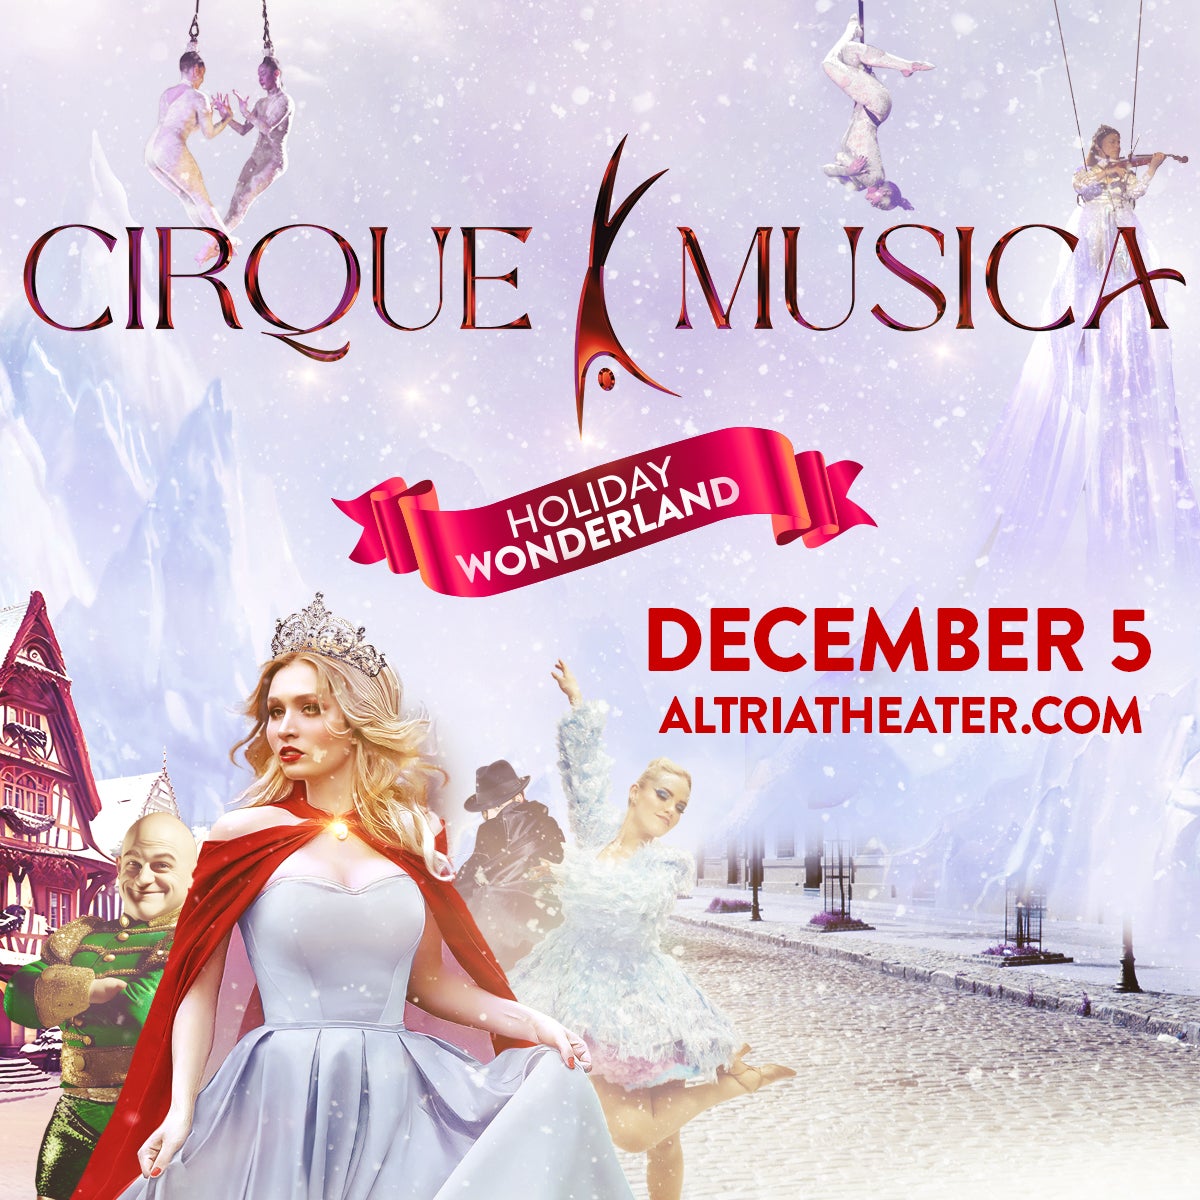 More Info for ALL-NEW CIRQUE MUSICAL HOLIDAY WONDERLAND IS COMING TO ALTRIA THEATER ON DECEMBER 5